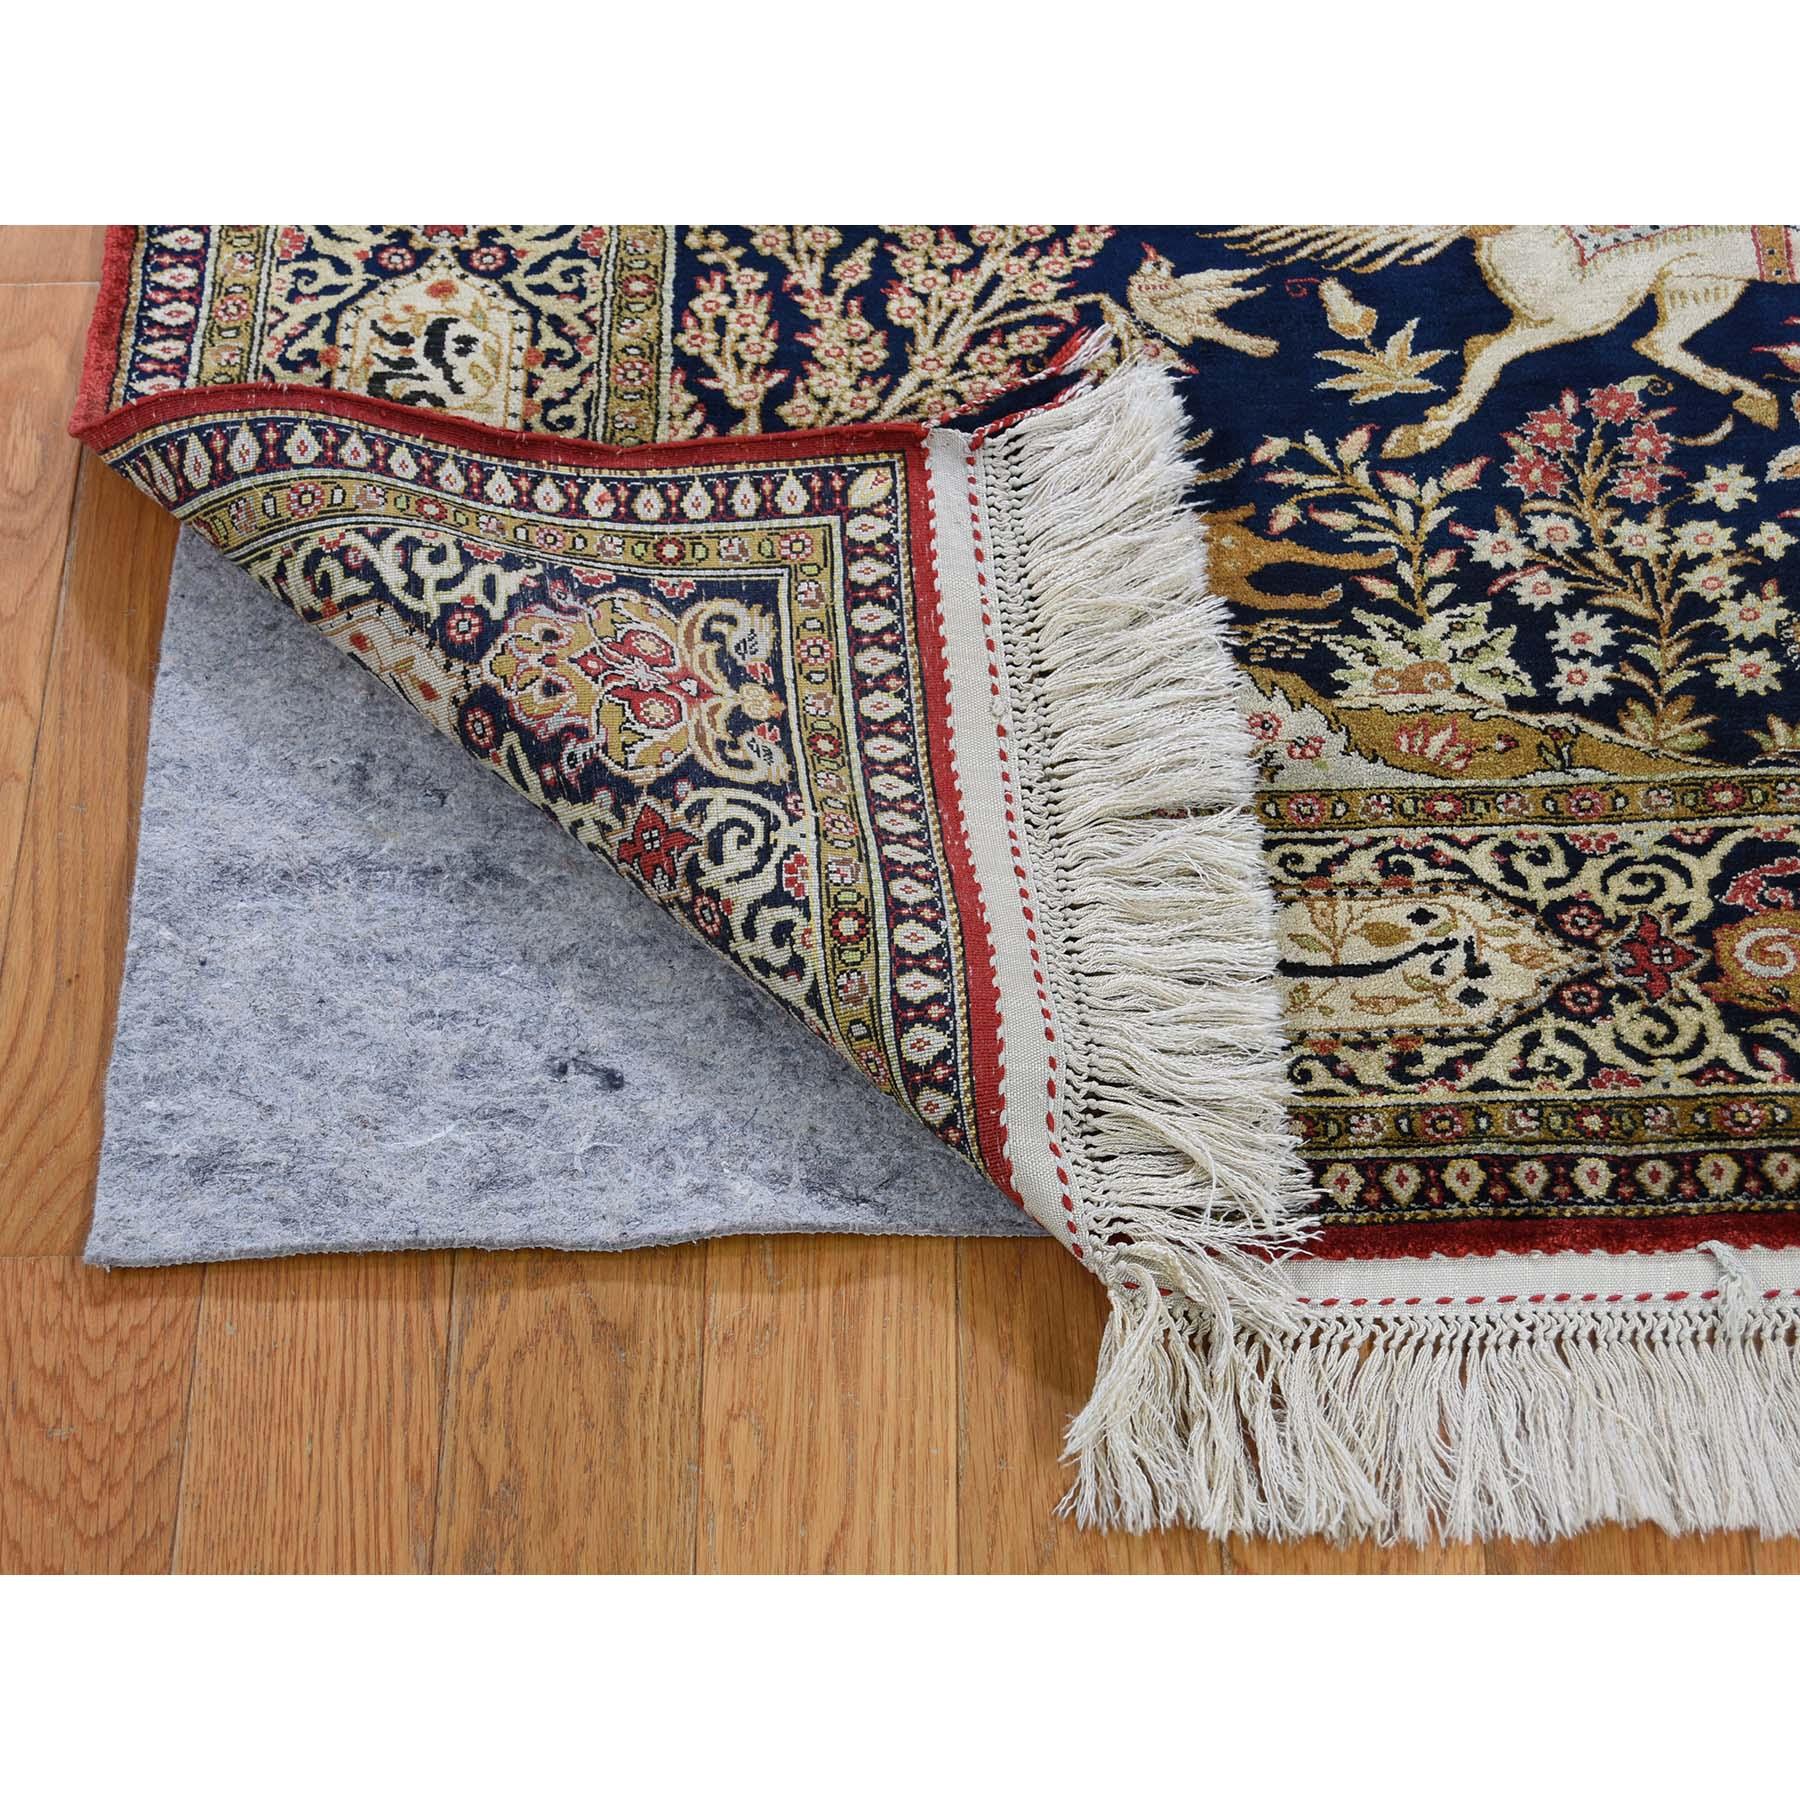 This is a truly genuine one-of-a-kind navy blue vintage Persian silk Qum hunting design with poetry rug. It has been knotted for months and months in the centuries-old Persian weaving craftsmanship techniques by expert artisans.
Primary materials: